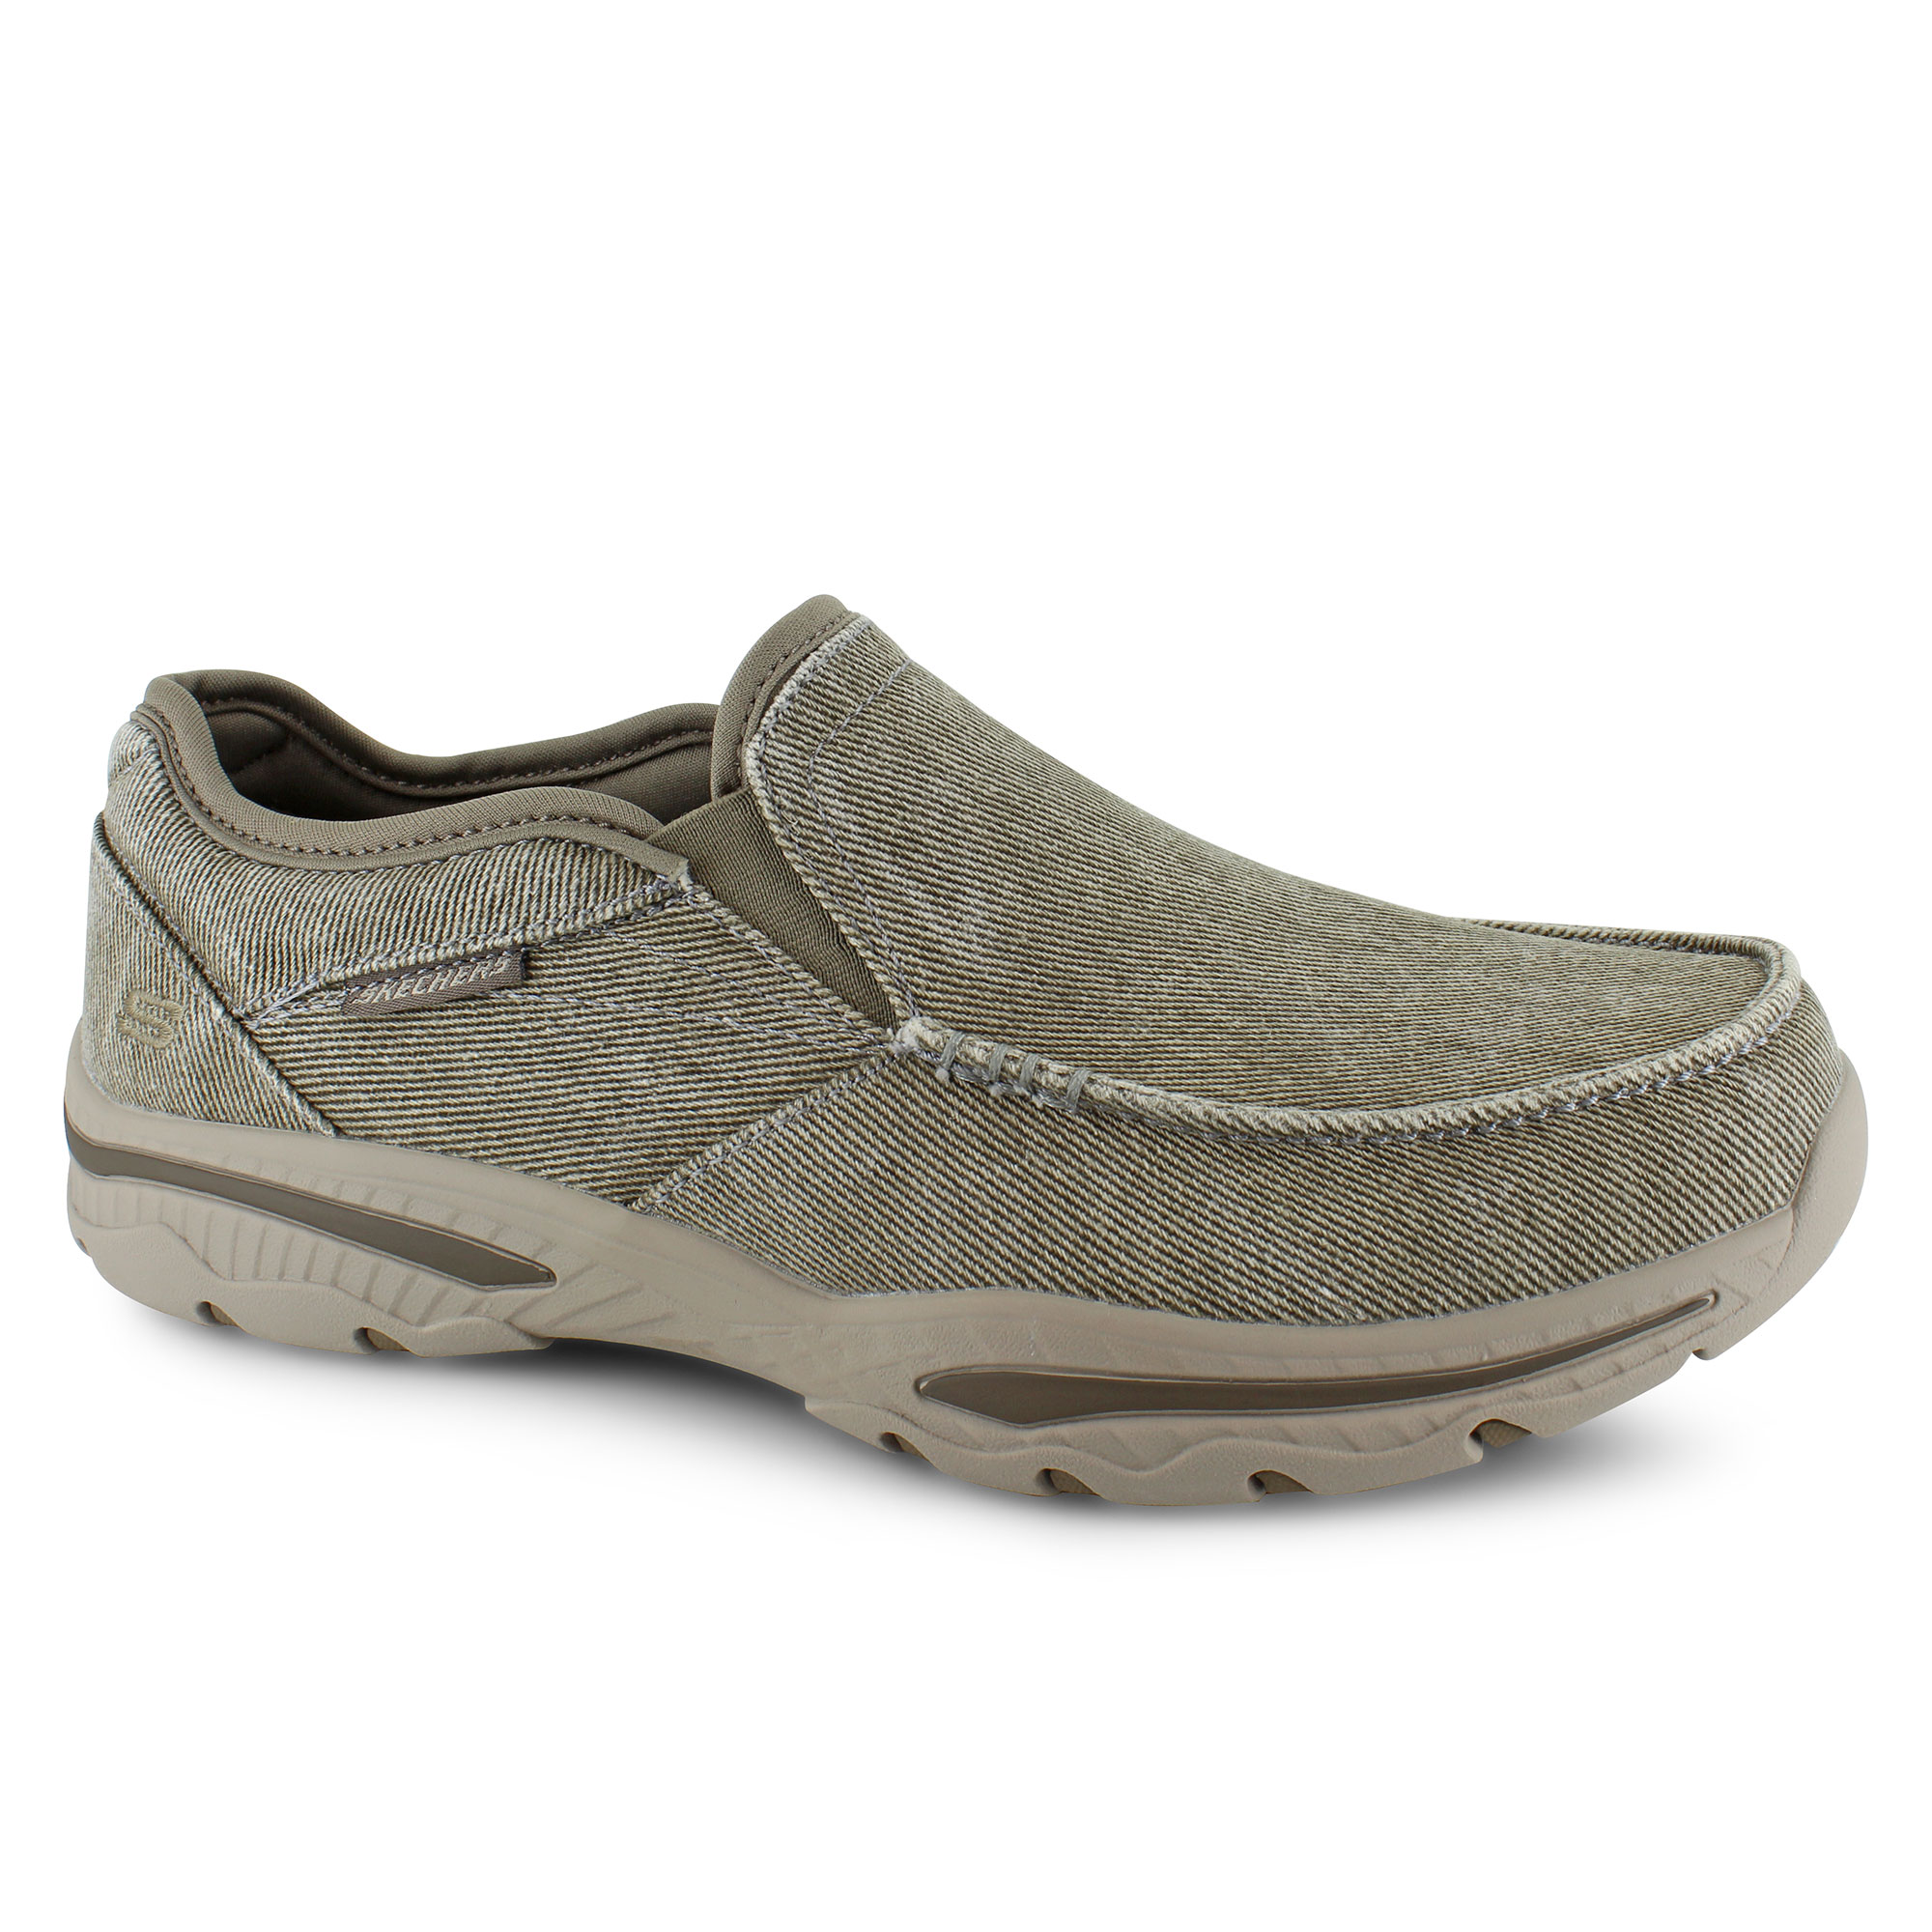 Skechers Relaxed Fit: Creston - Moseco 65355